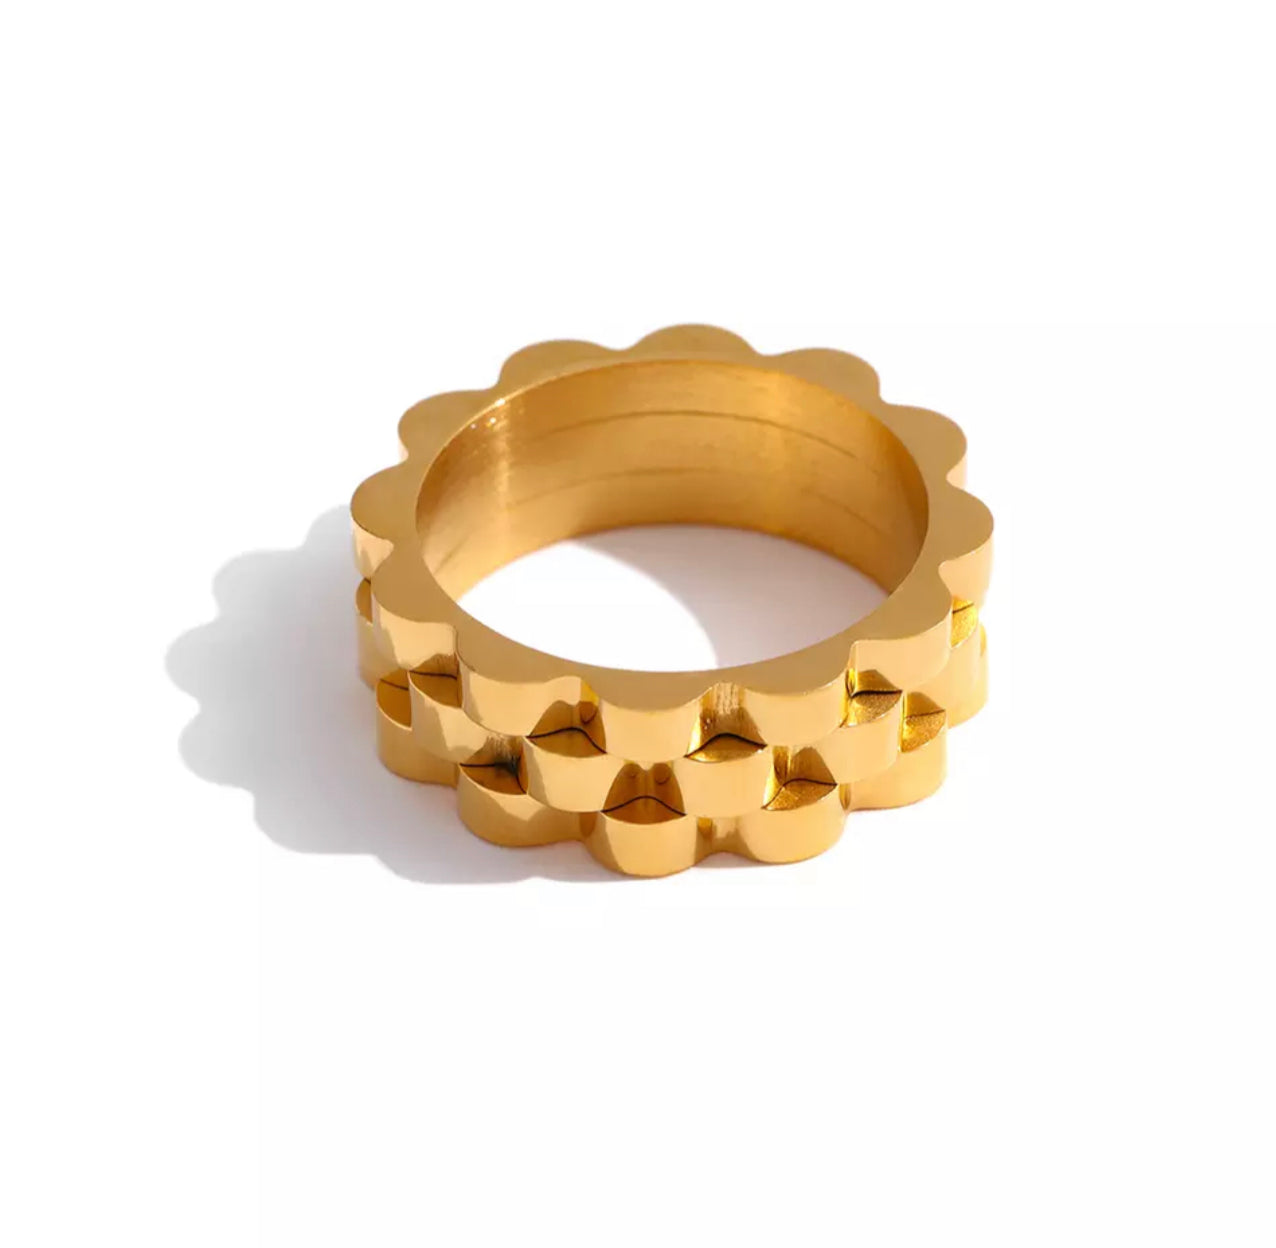 Erika Williner Designs - Rolly Ring